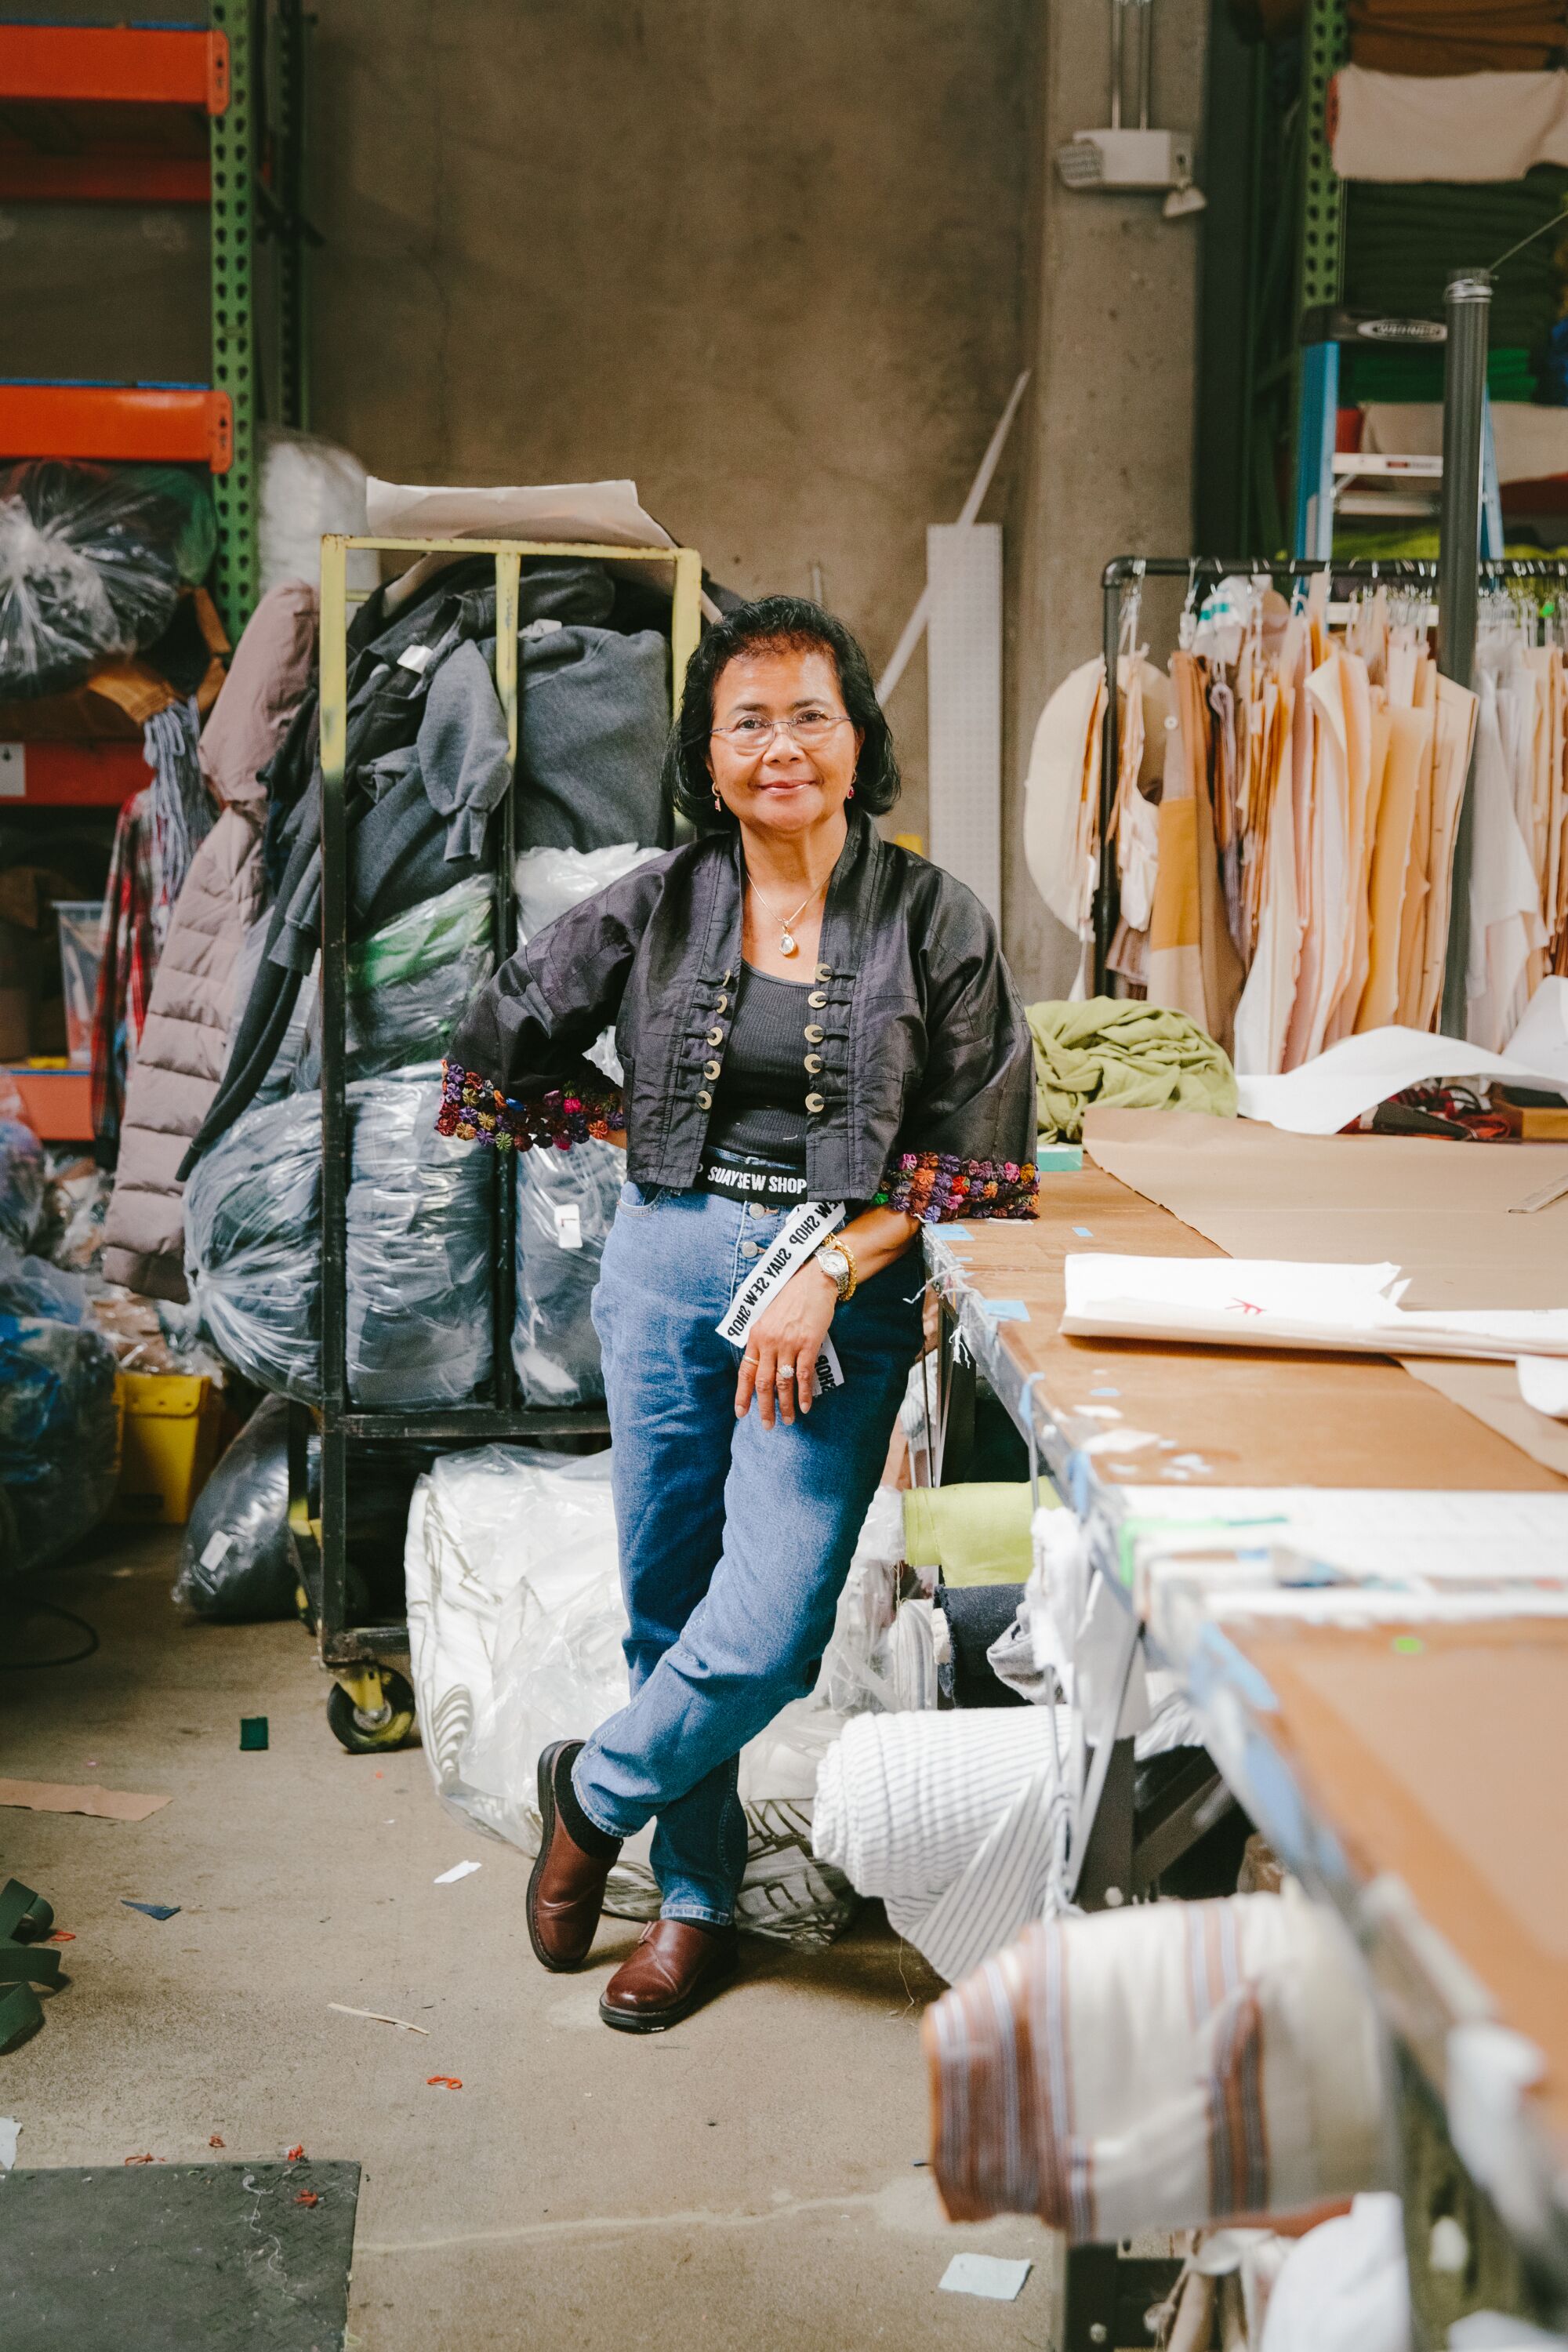 Tina Dosewell, the Suay matriarch, shares warmth and expertise throughout the warehouse.